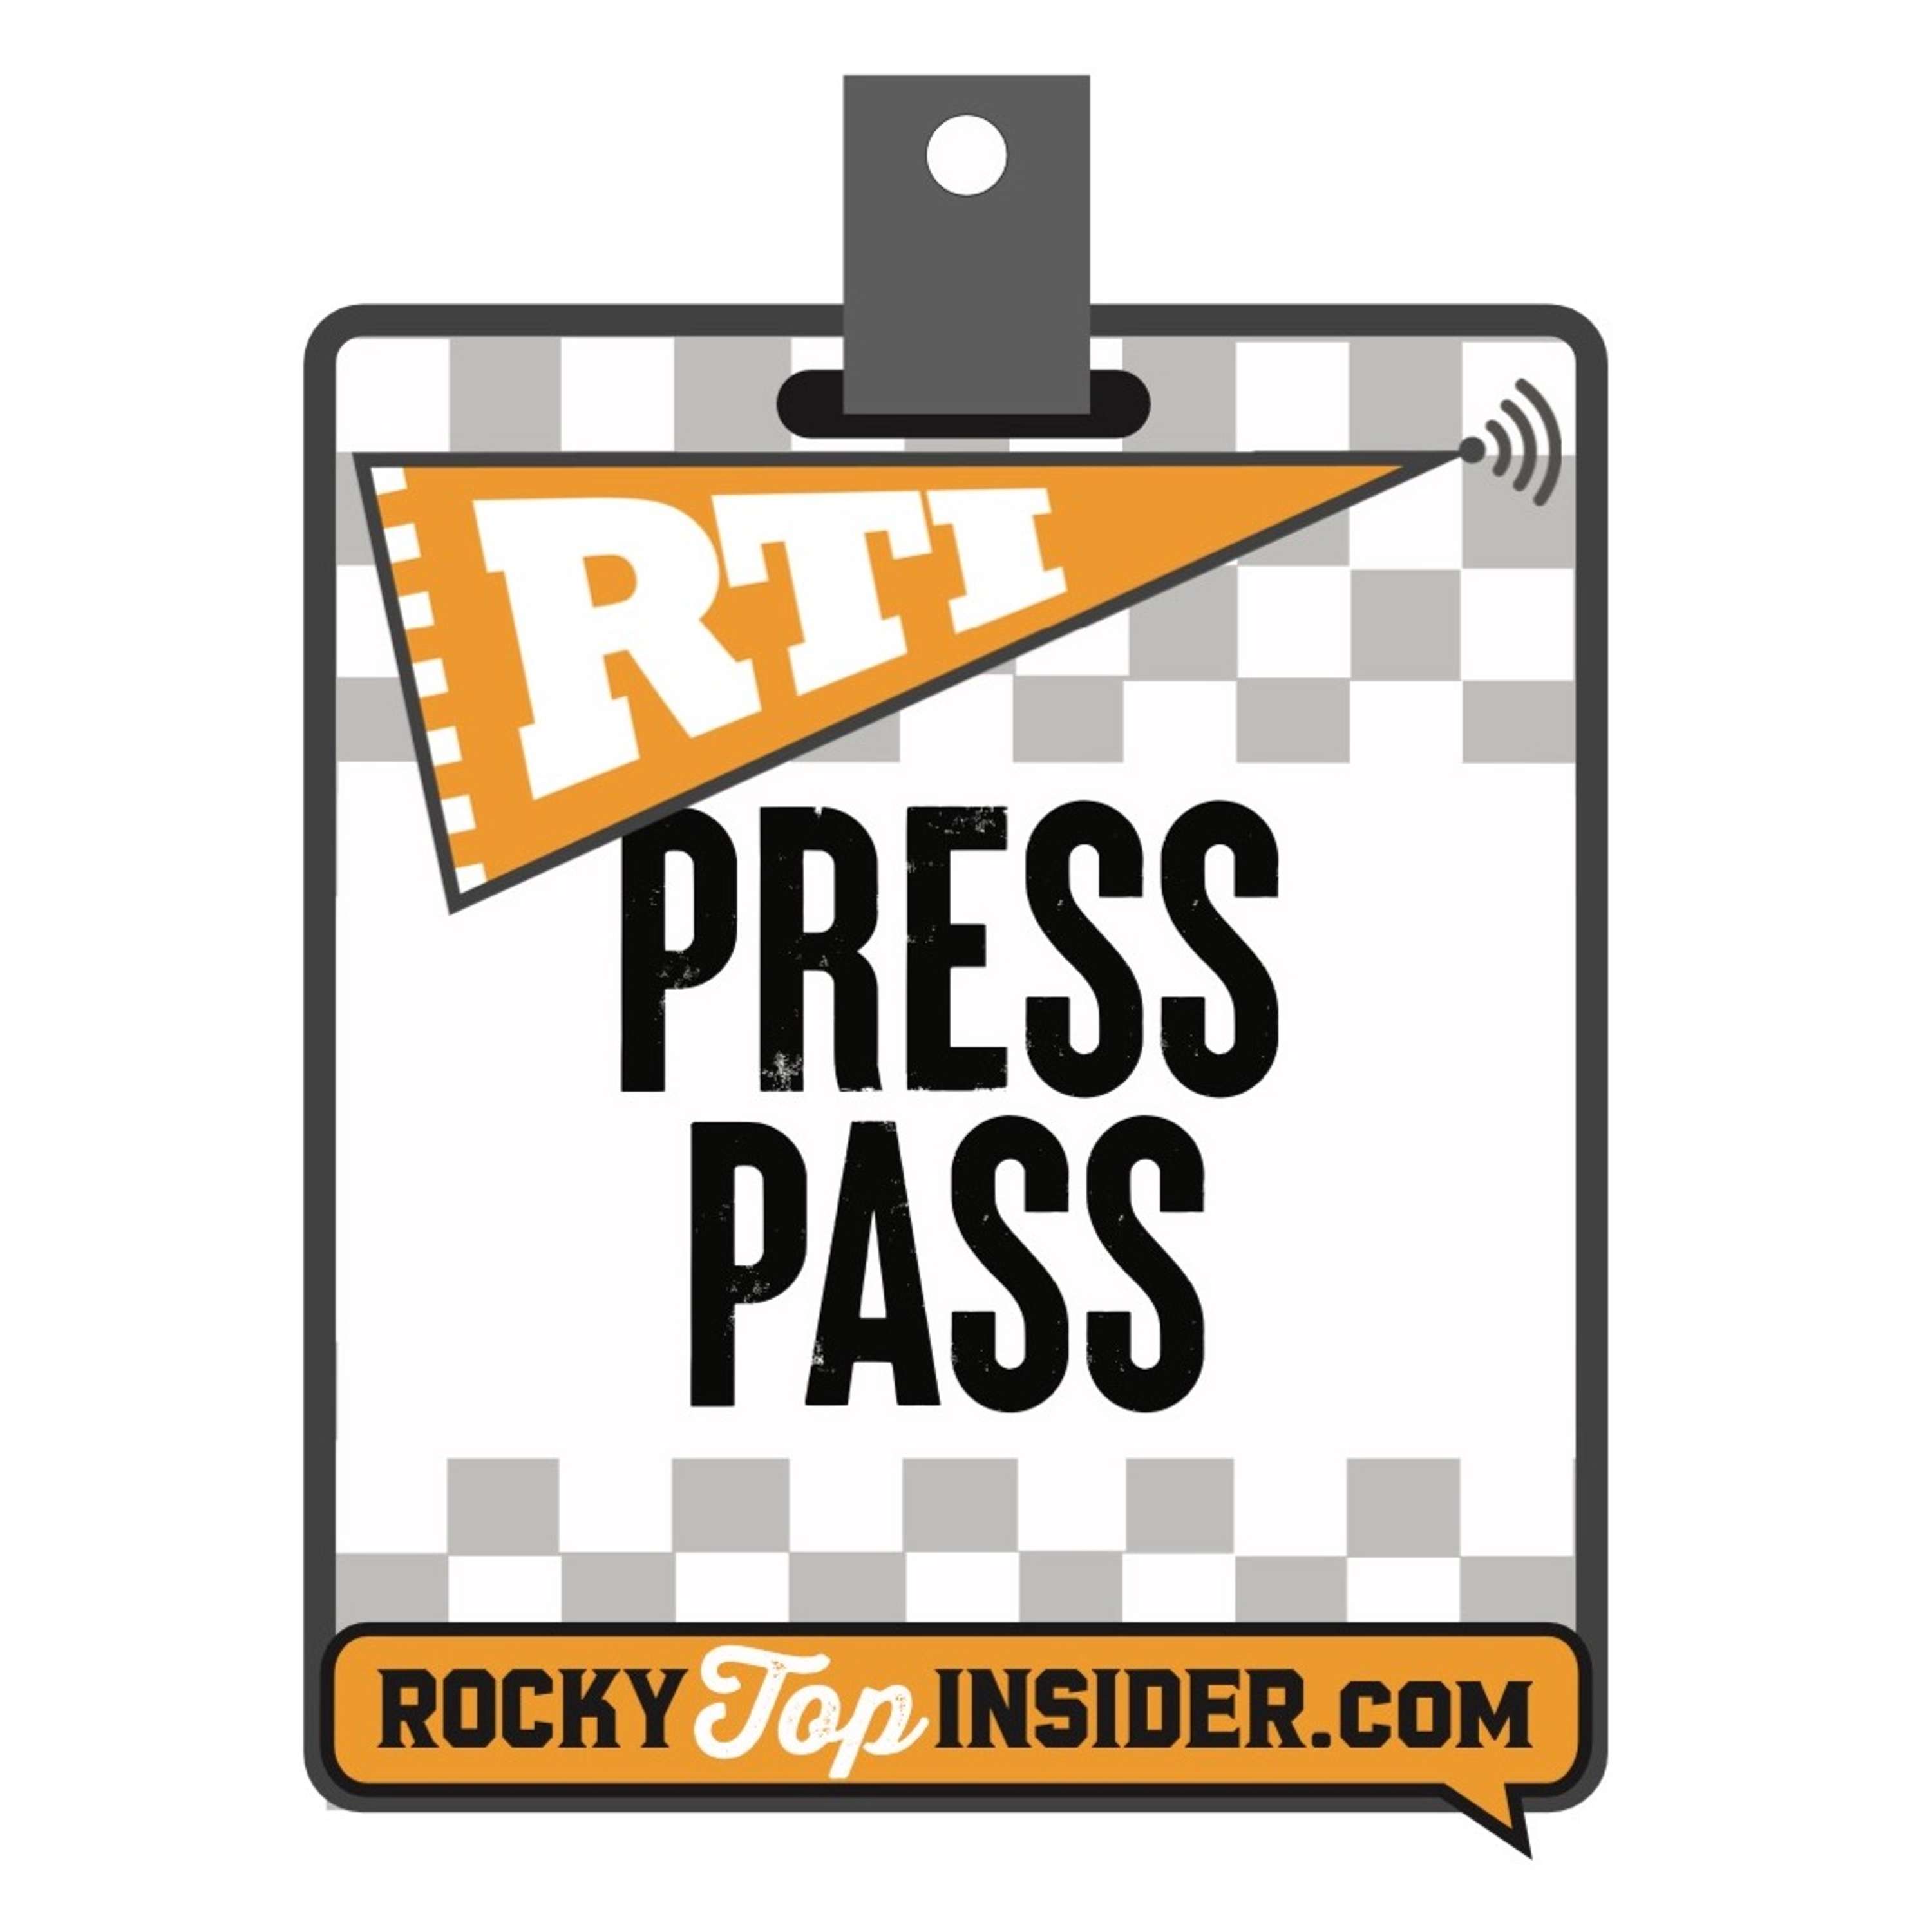 Breaking Down Vol Hoops' Transfer Additions & NFL Draft Reactions! | RTI: Press Pass